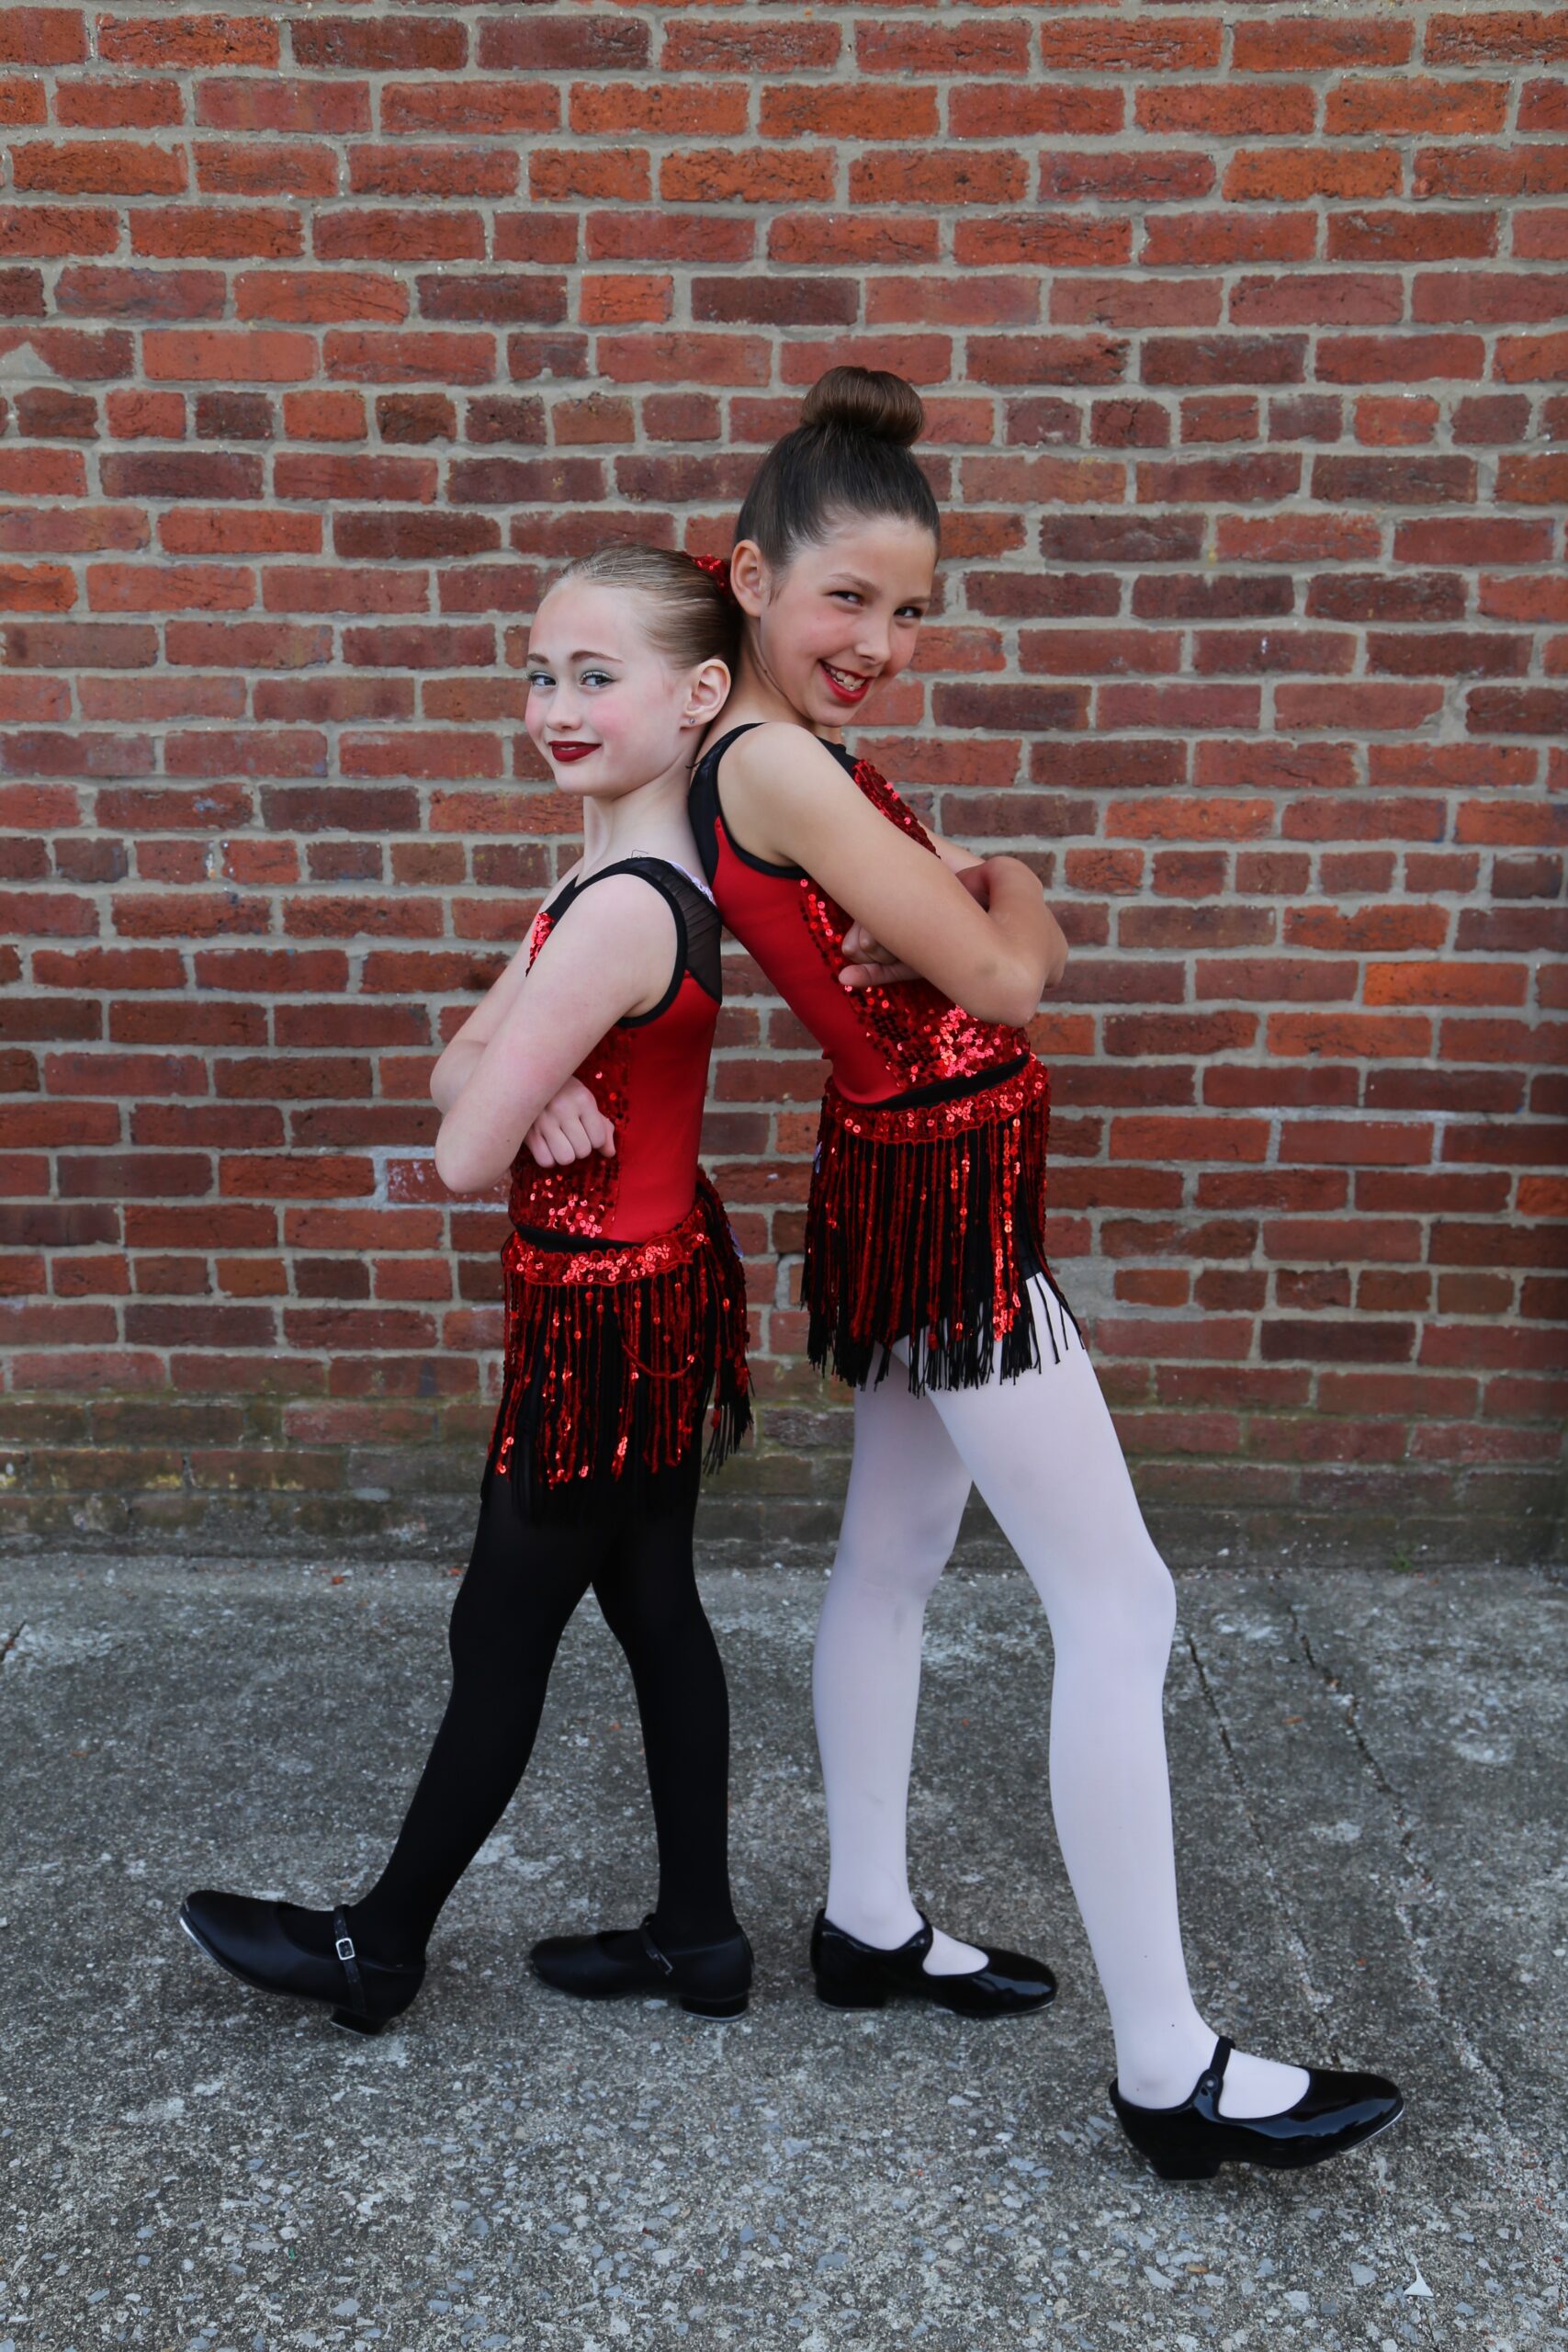 All That Jazz duo posing against a brick wall in red and black outfits